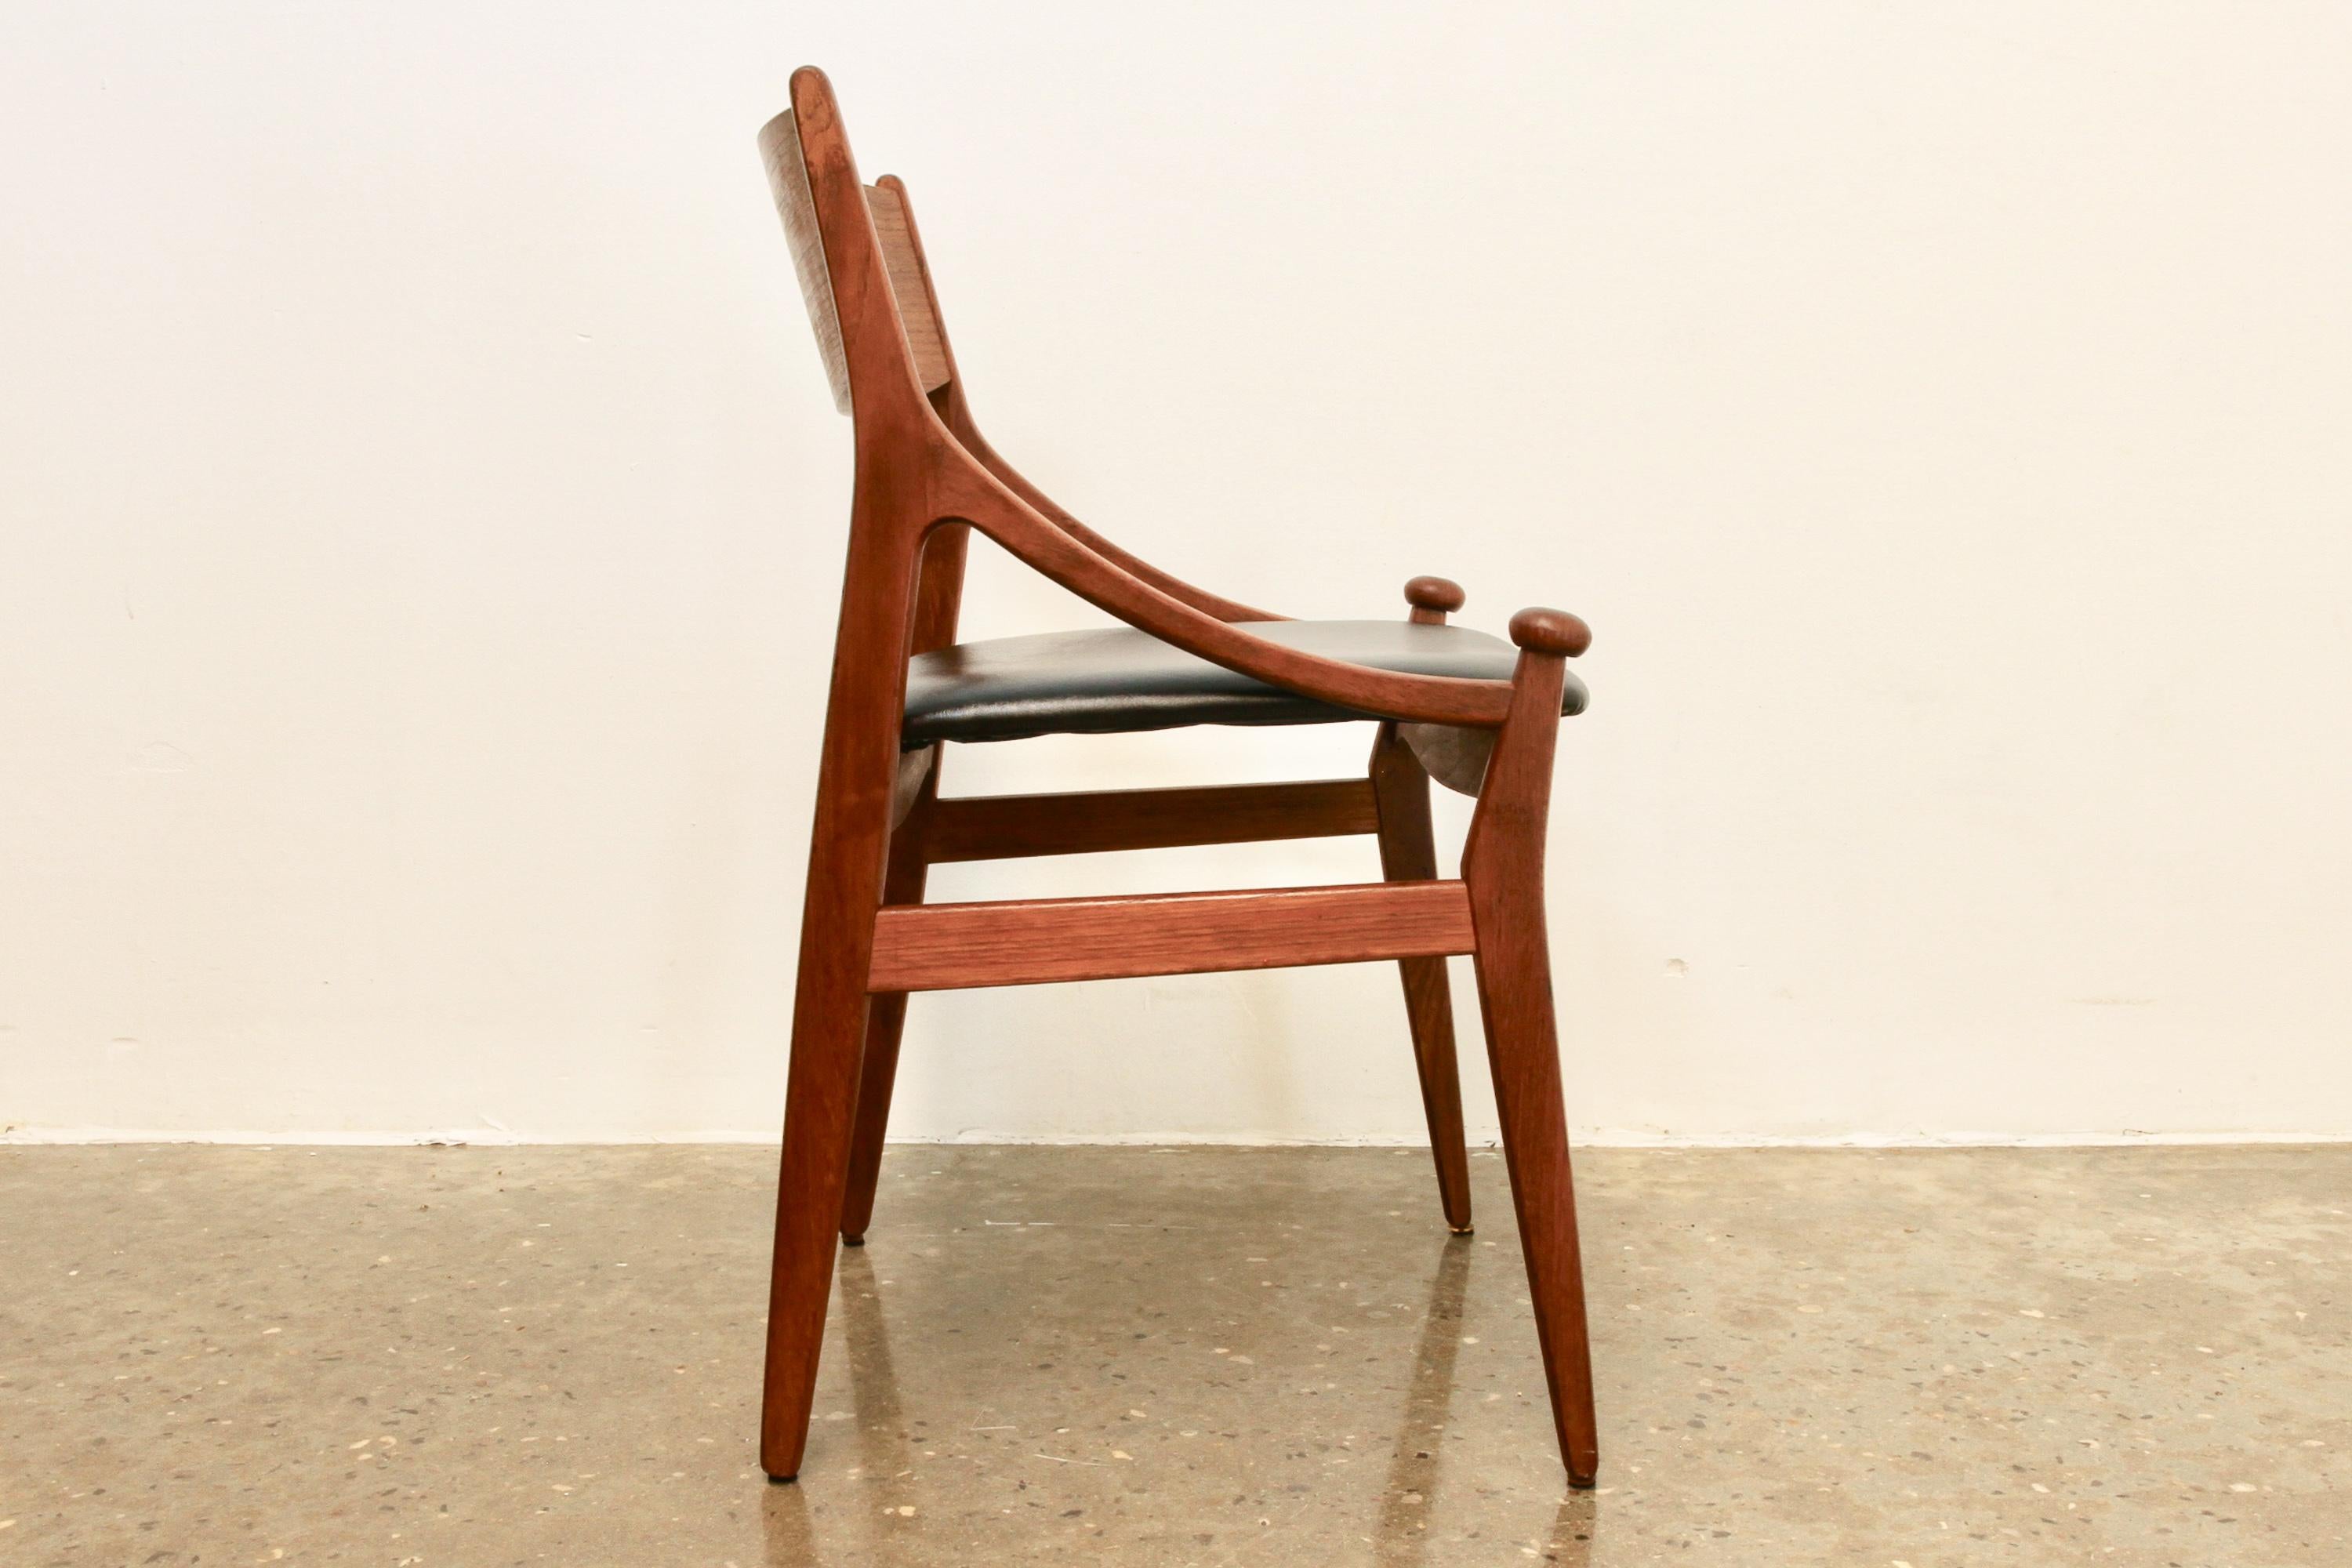 Vintage Danish teak chair by Vestervig Eriksen for Brdr. Tromborgs Møbelfabrik, 1960s.
Very elegant and sculpted Mid-Century Modern chair in solid teak designed by Danish architect H. Vestervig Eriksen. Curved arms and arched legs. This is the rare